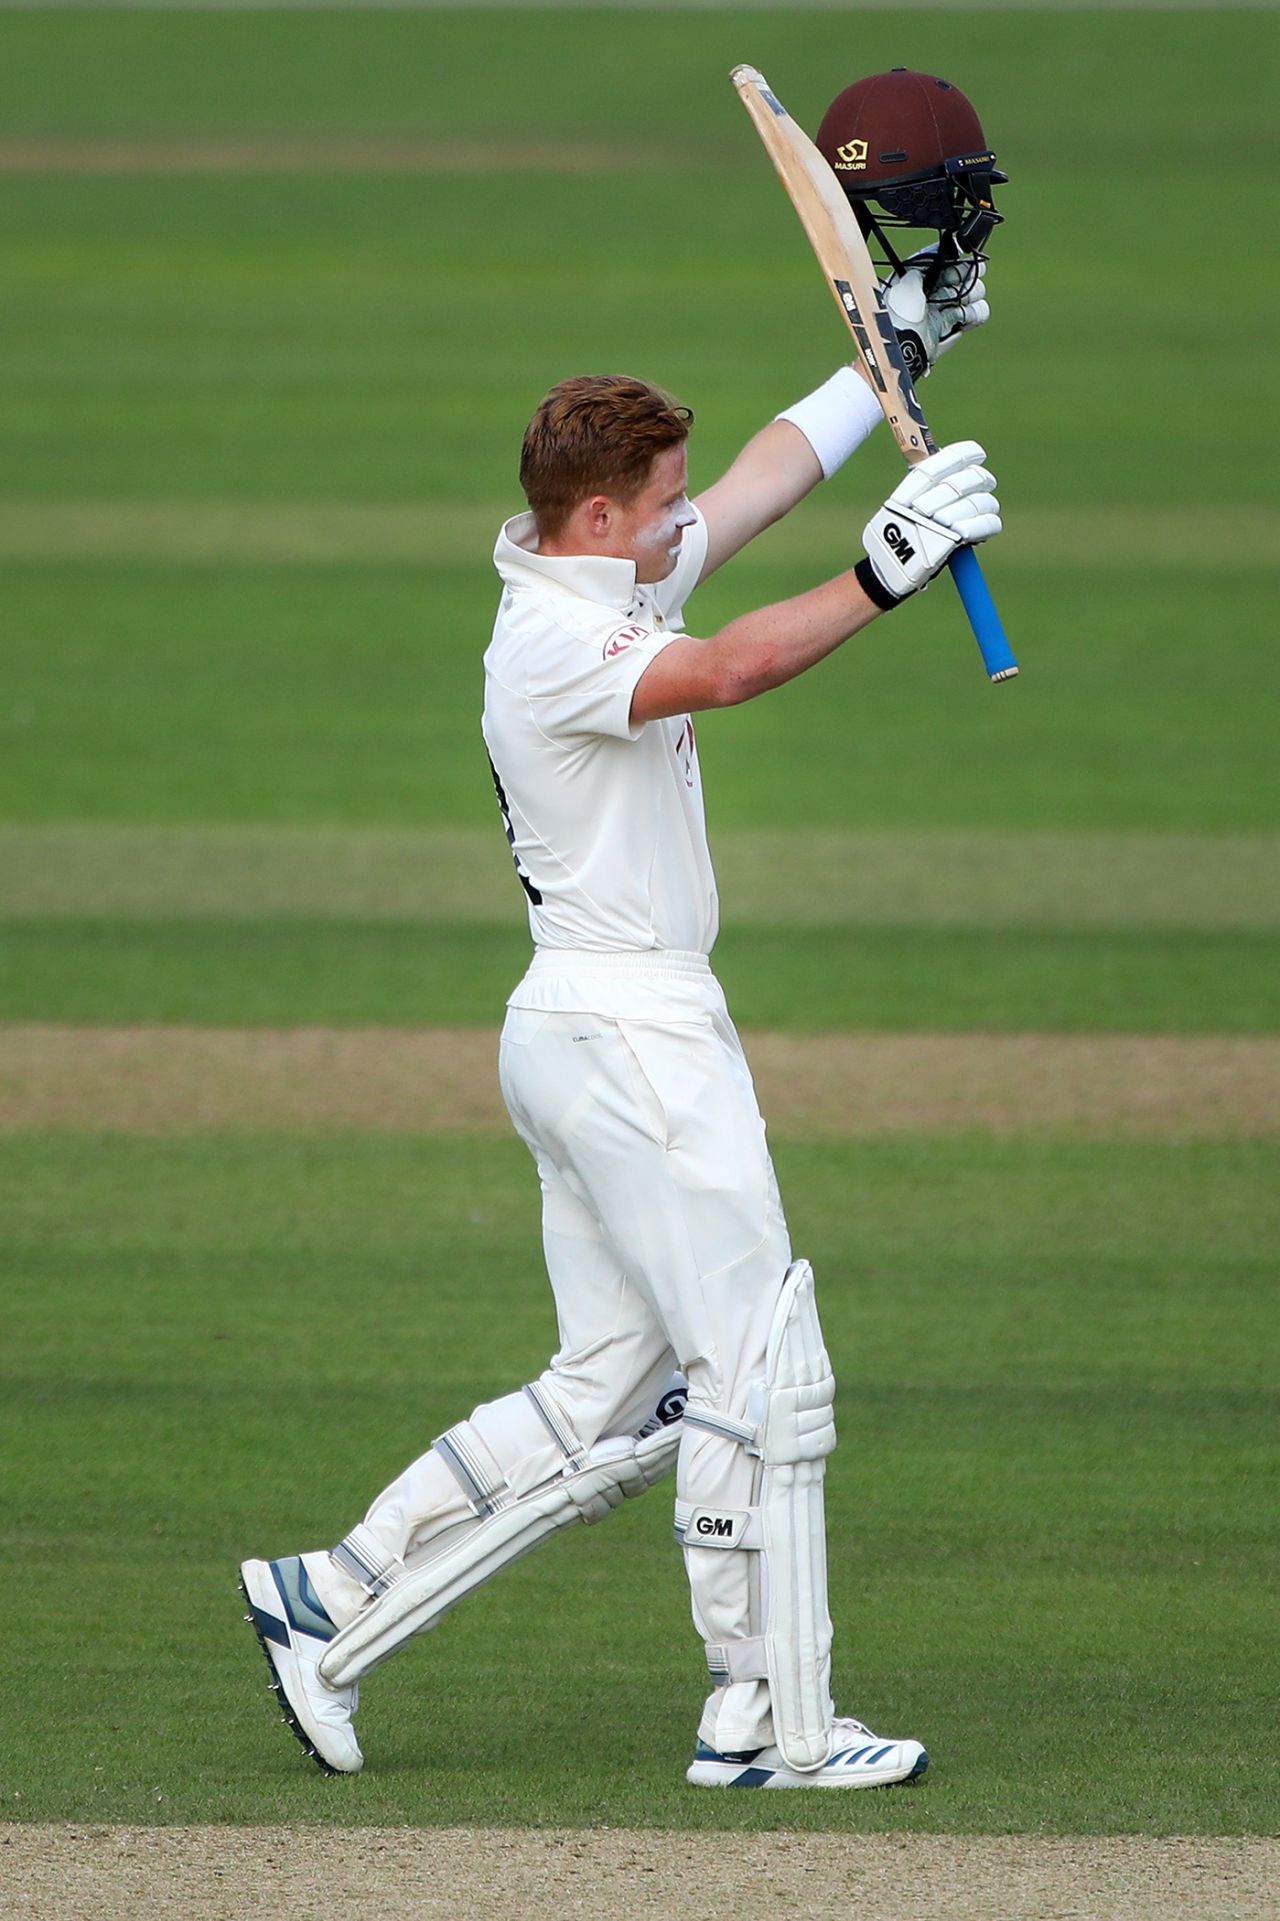 Ollie Pope raises his bat on reaching three figures, Surrey v Hampshire, County Championship, The Oval, August 20, 2019